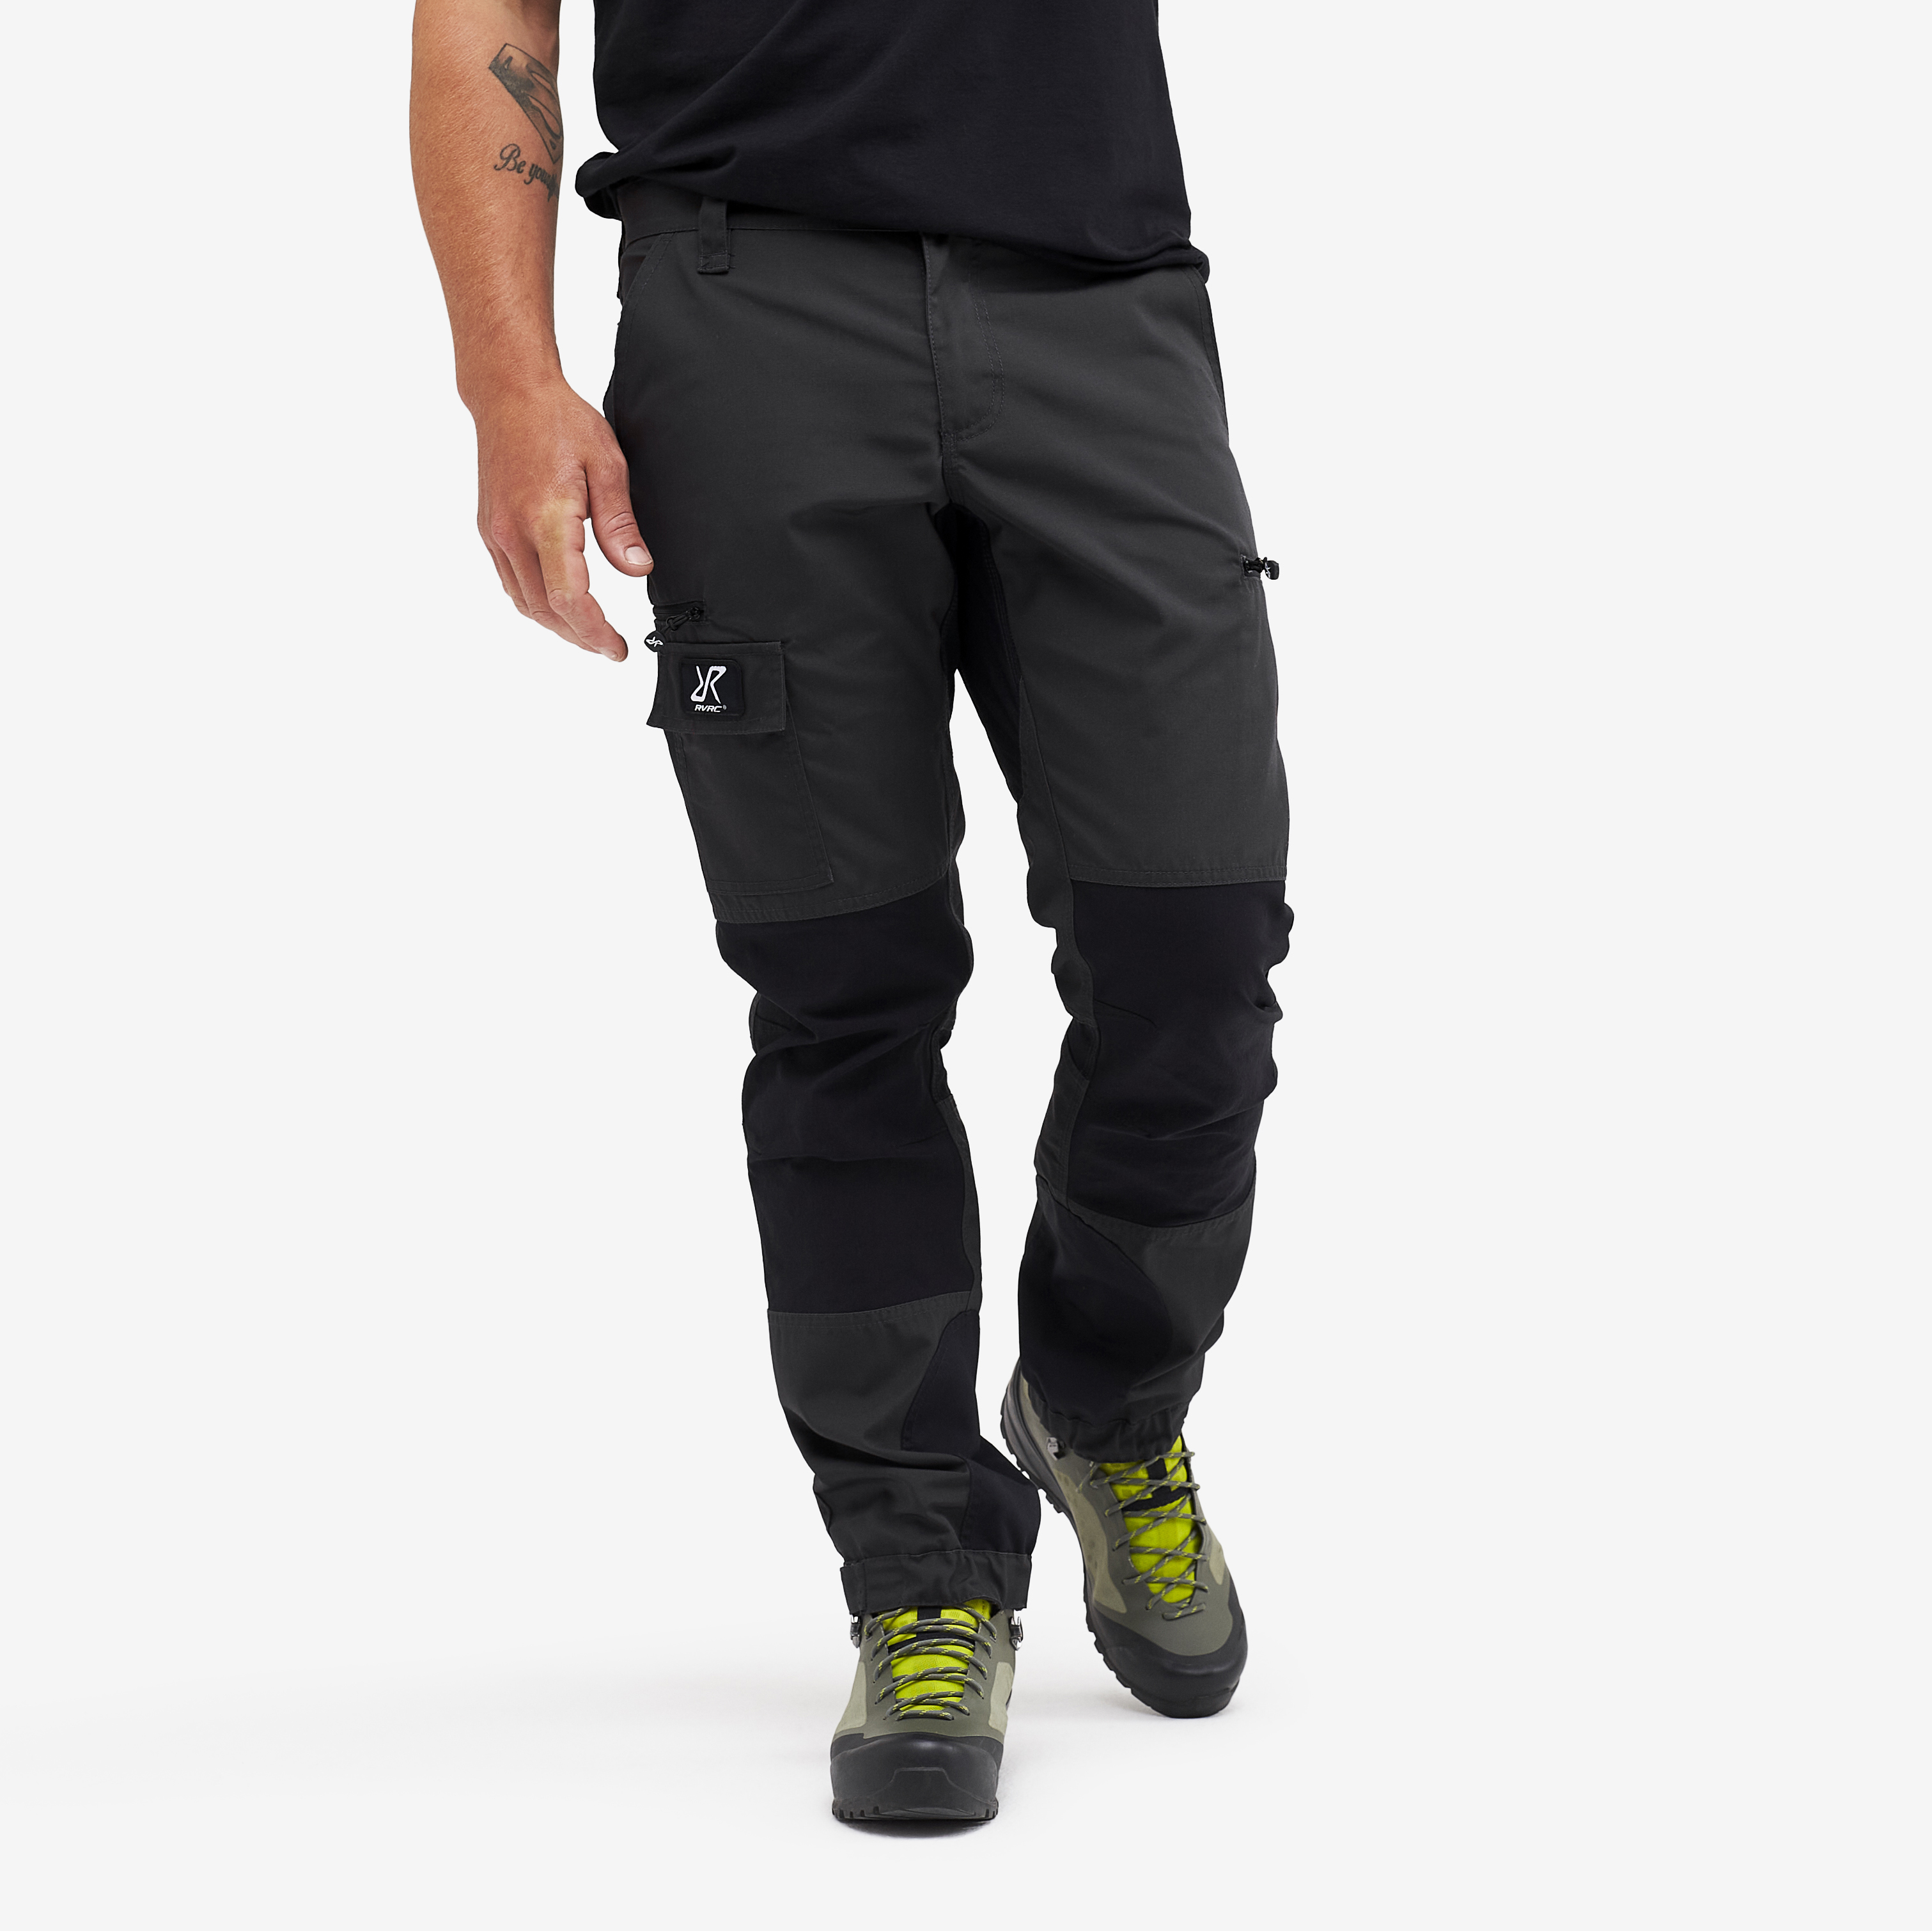 Nordwand Short Pants Anthracite Heren